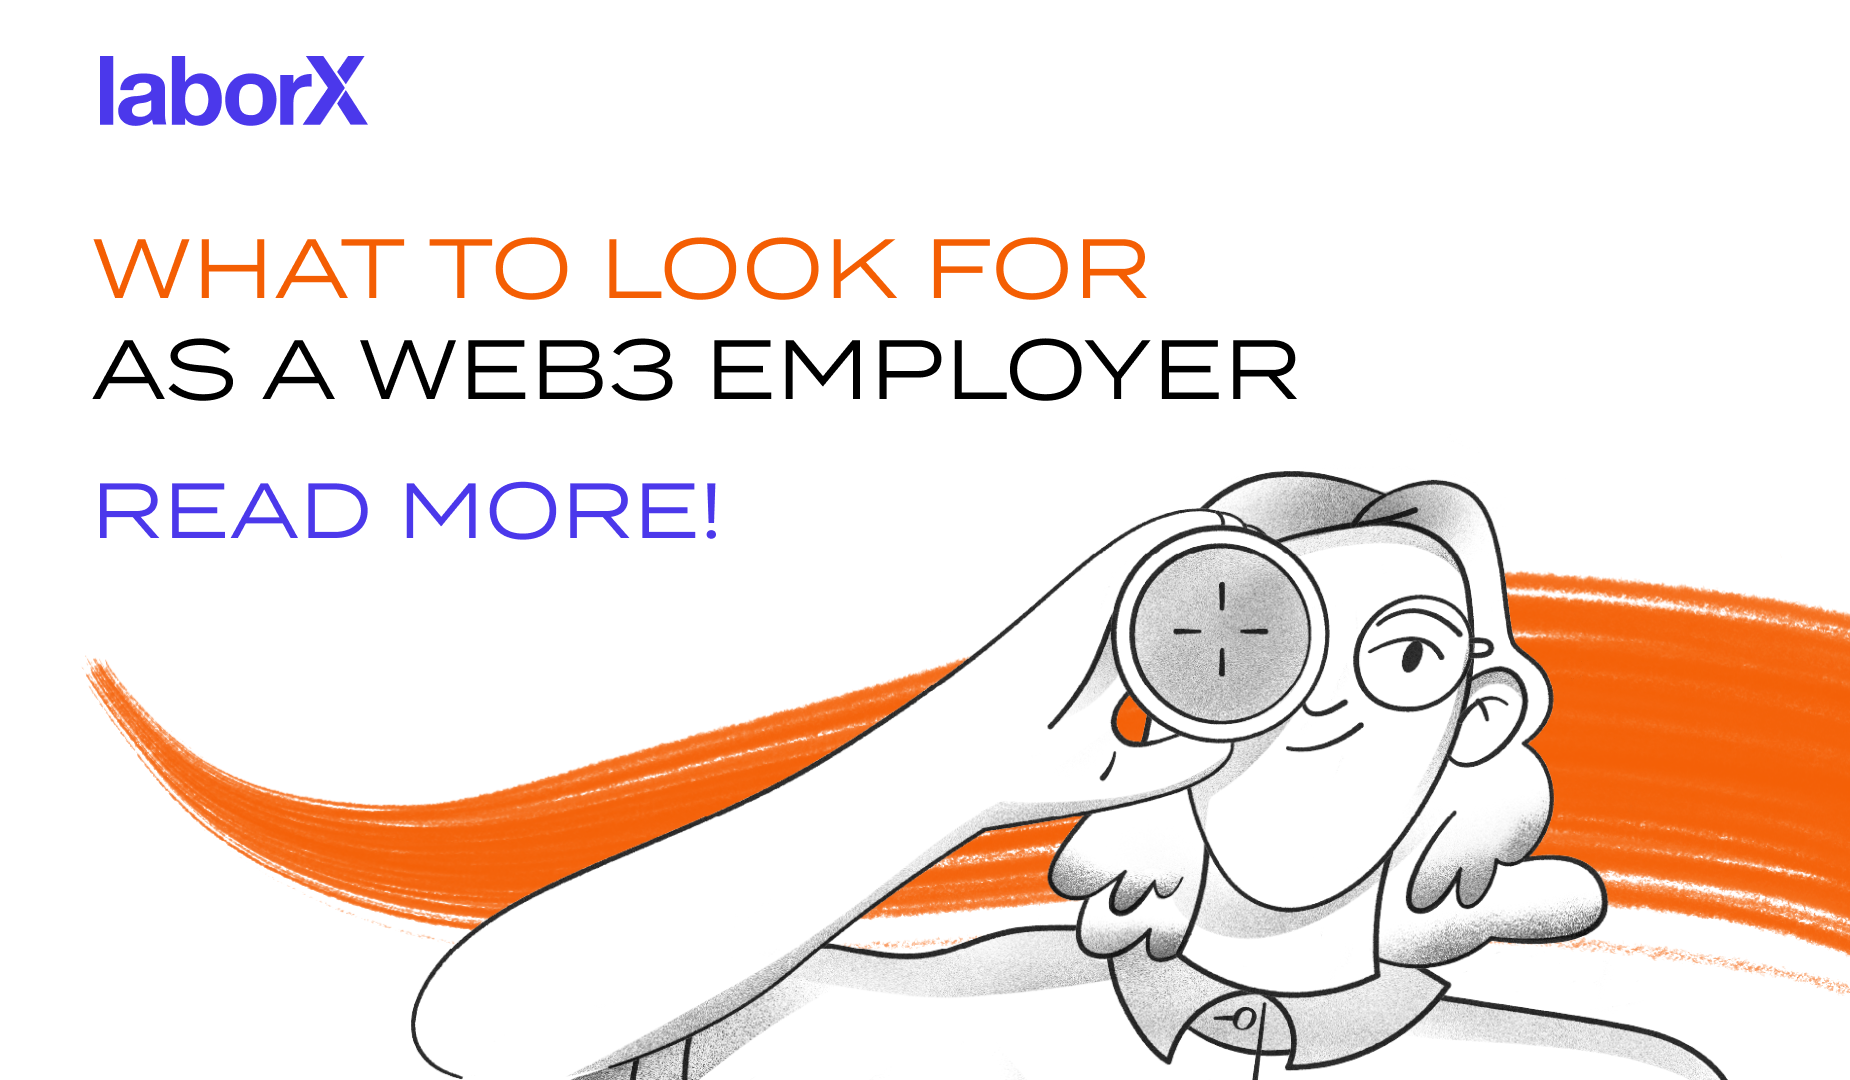 What To Look For As A Web3 Employer